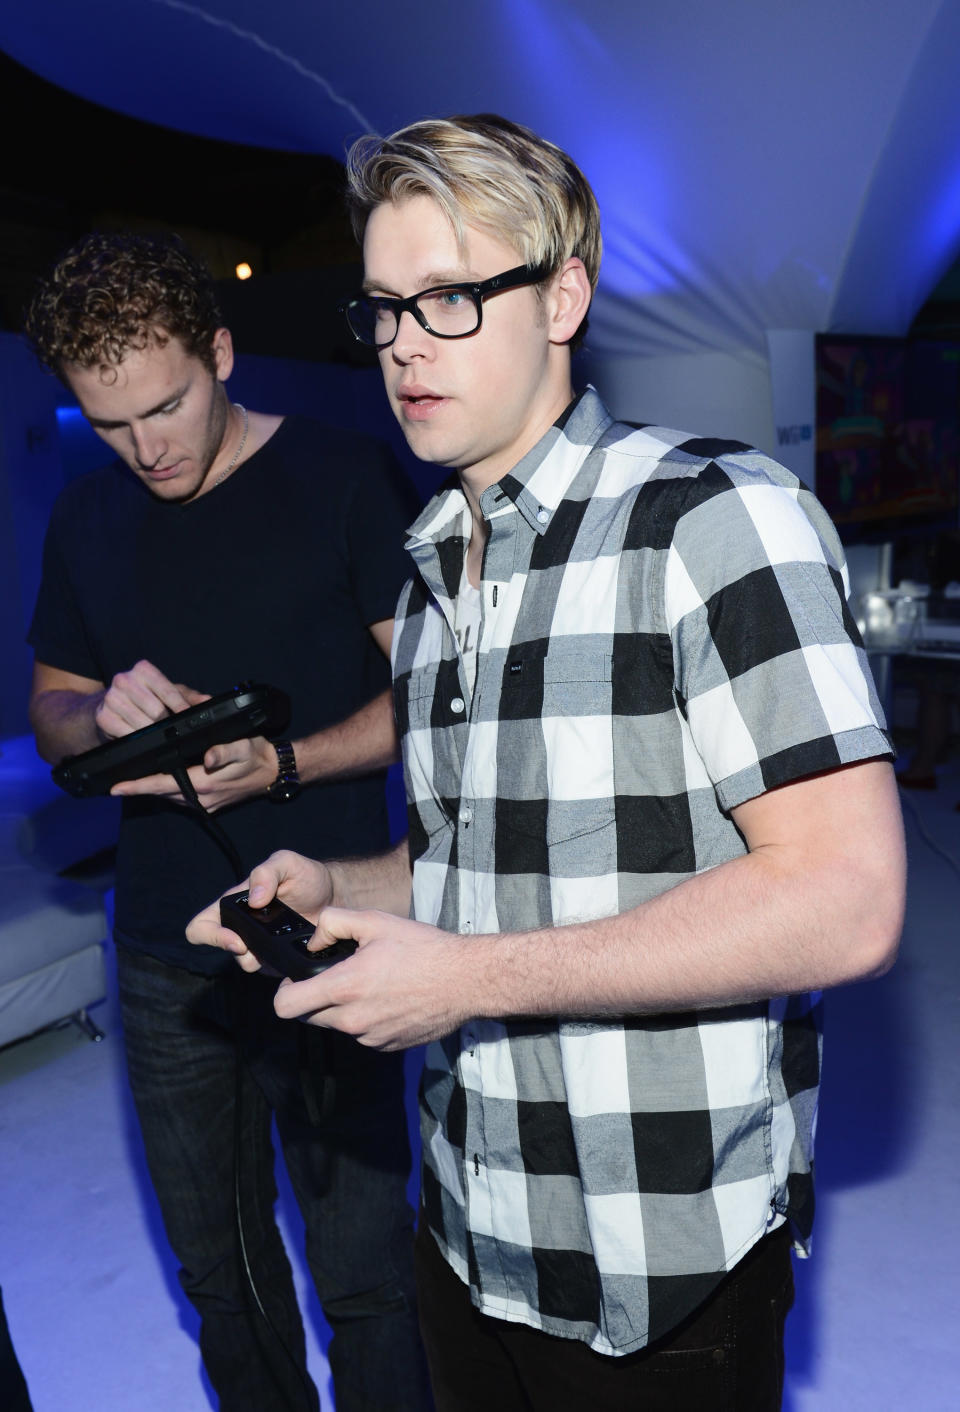 LOS ANGELES, CA - SEPTEMBER 20: Chord Overstreet (R) and guest attend the Nintendo Hosts Wii U Experience In Los Angeles on September 20, 2012 in Los Angeles, California. (Photo by Michael Buckner/Getty Images for Nintendo)